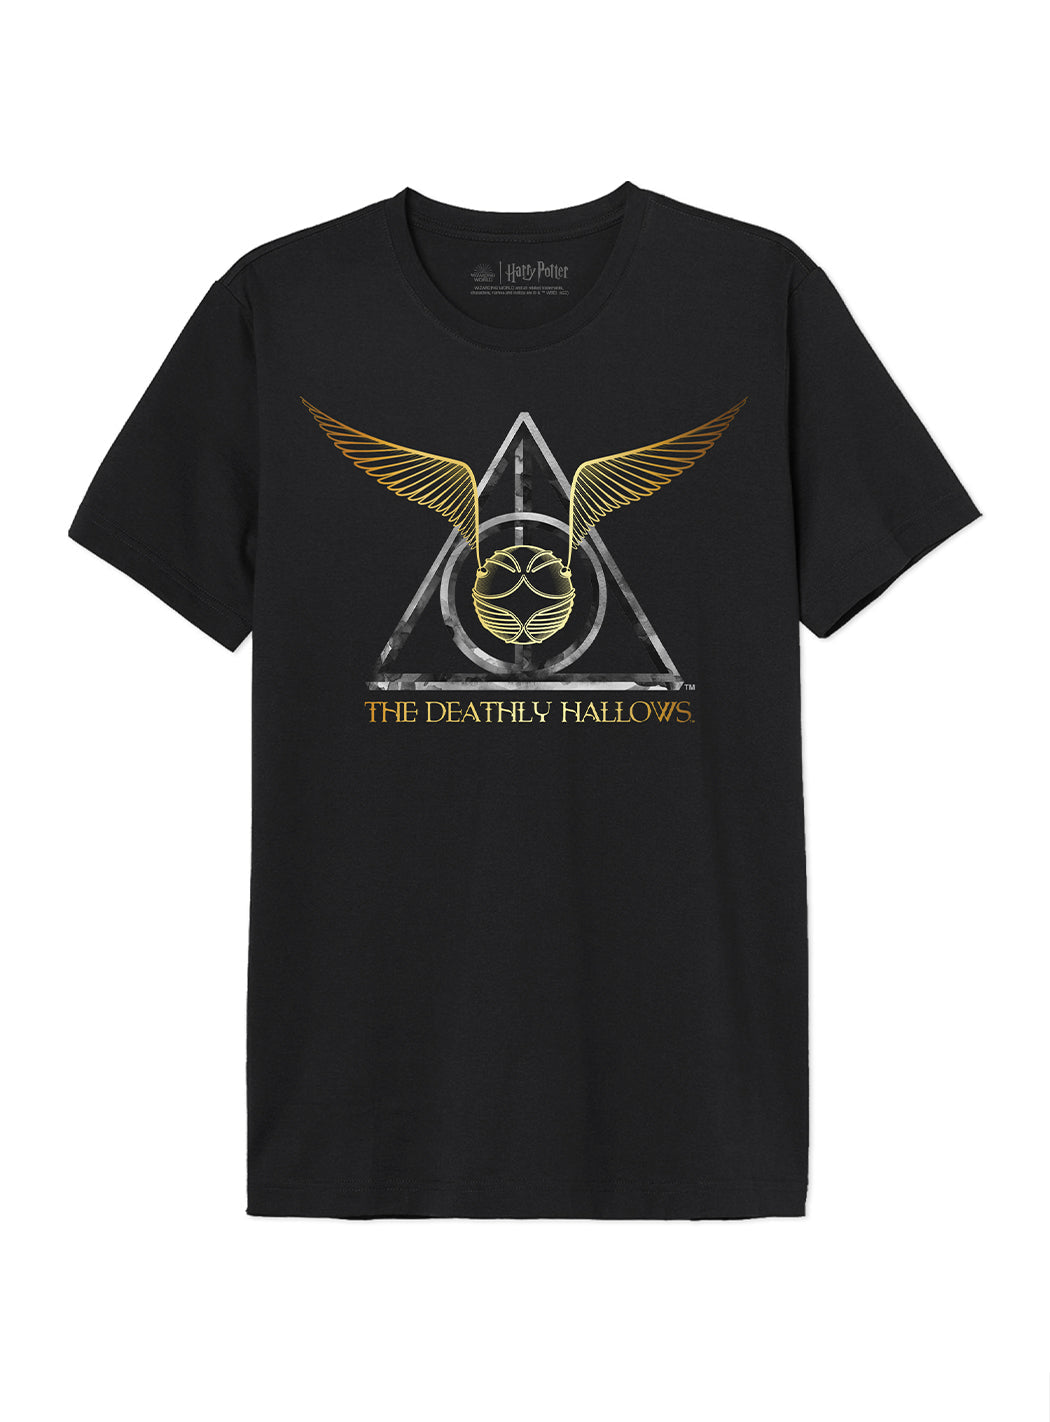 T-shirt Harry Potter - The Deathly Hallows Golden Snitch